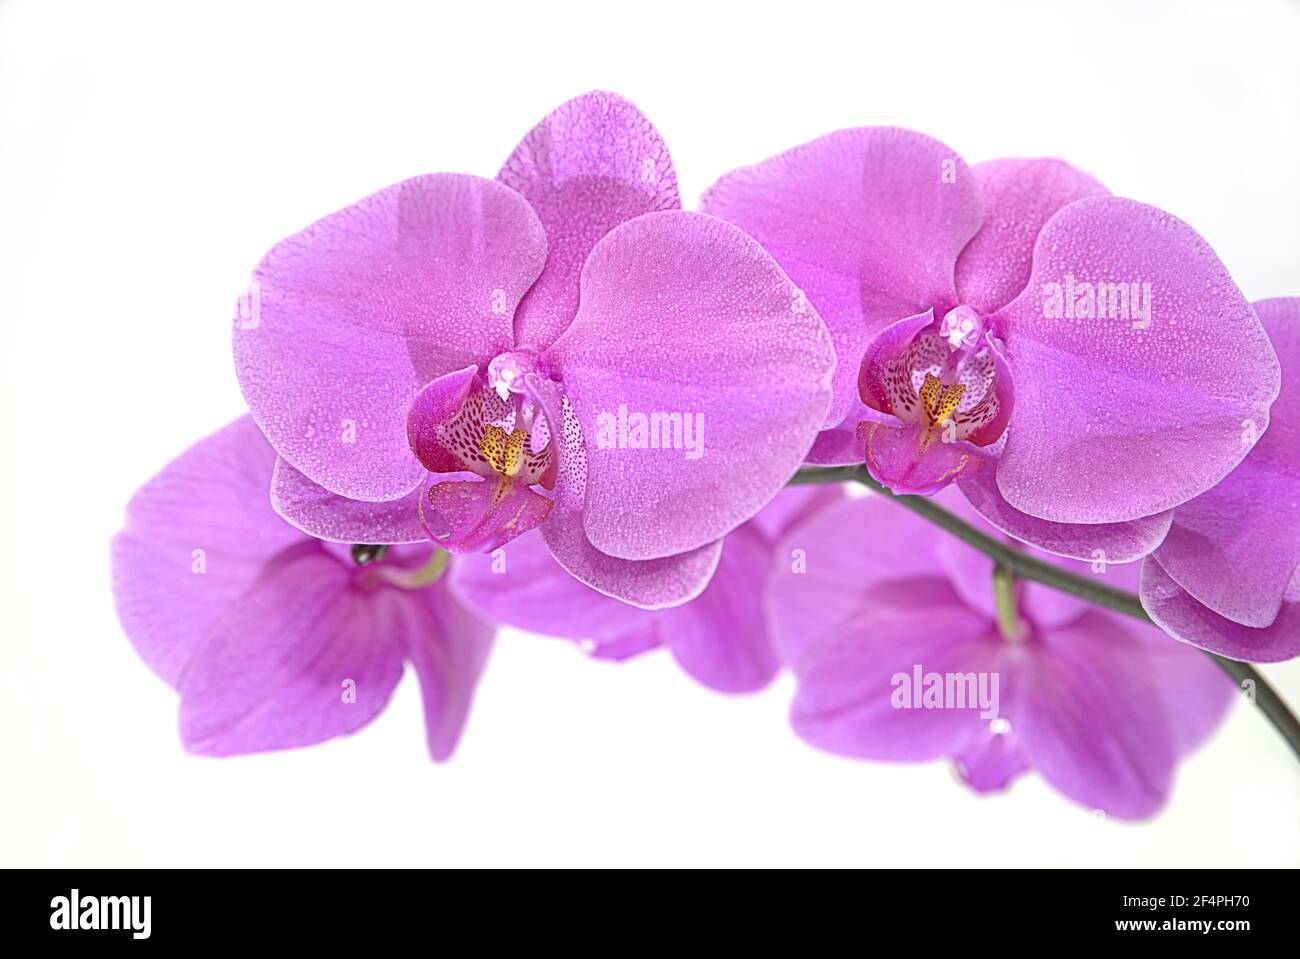 Purple flowers of orchidea covered with water drops with white background, phalaenopsis orchids, Phalaenopsis doritaenopsis Stock Photo